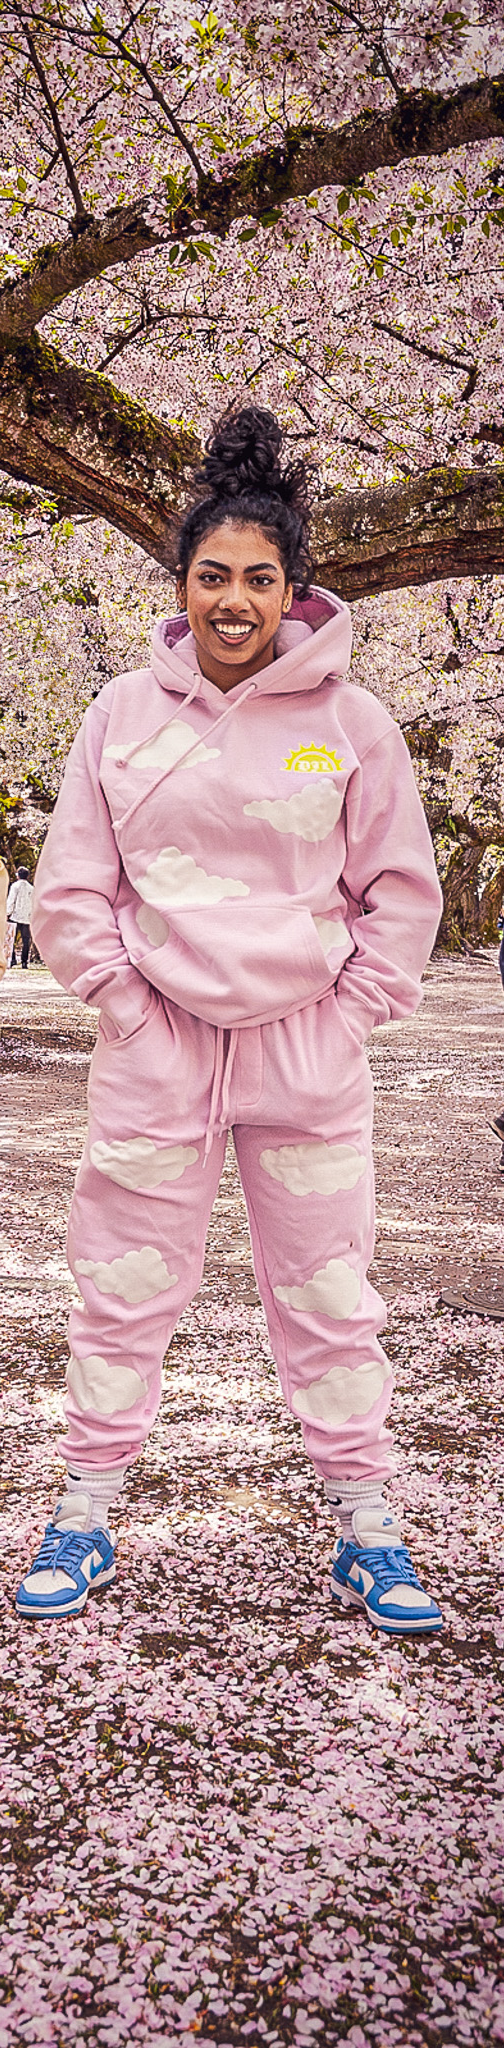 Clouded Dream Sweat Suit - Pink